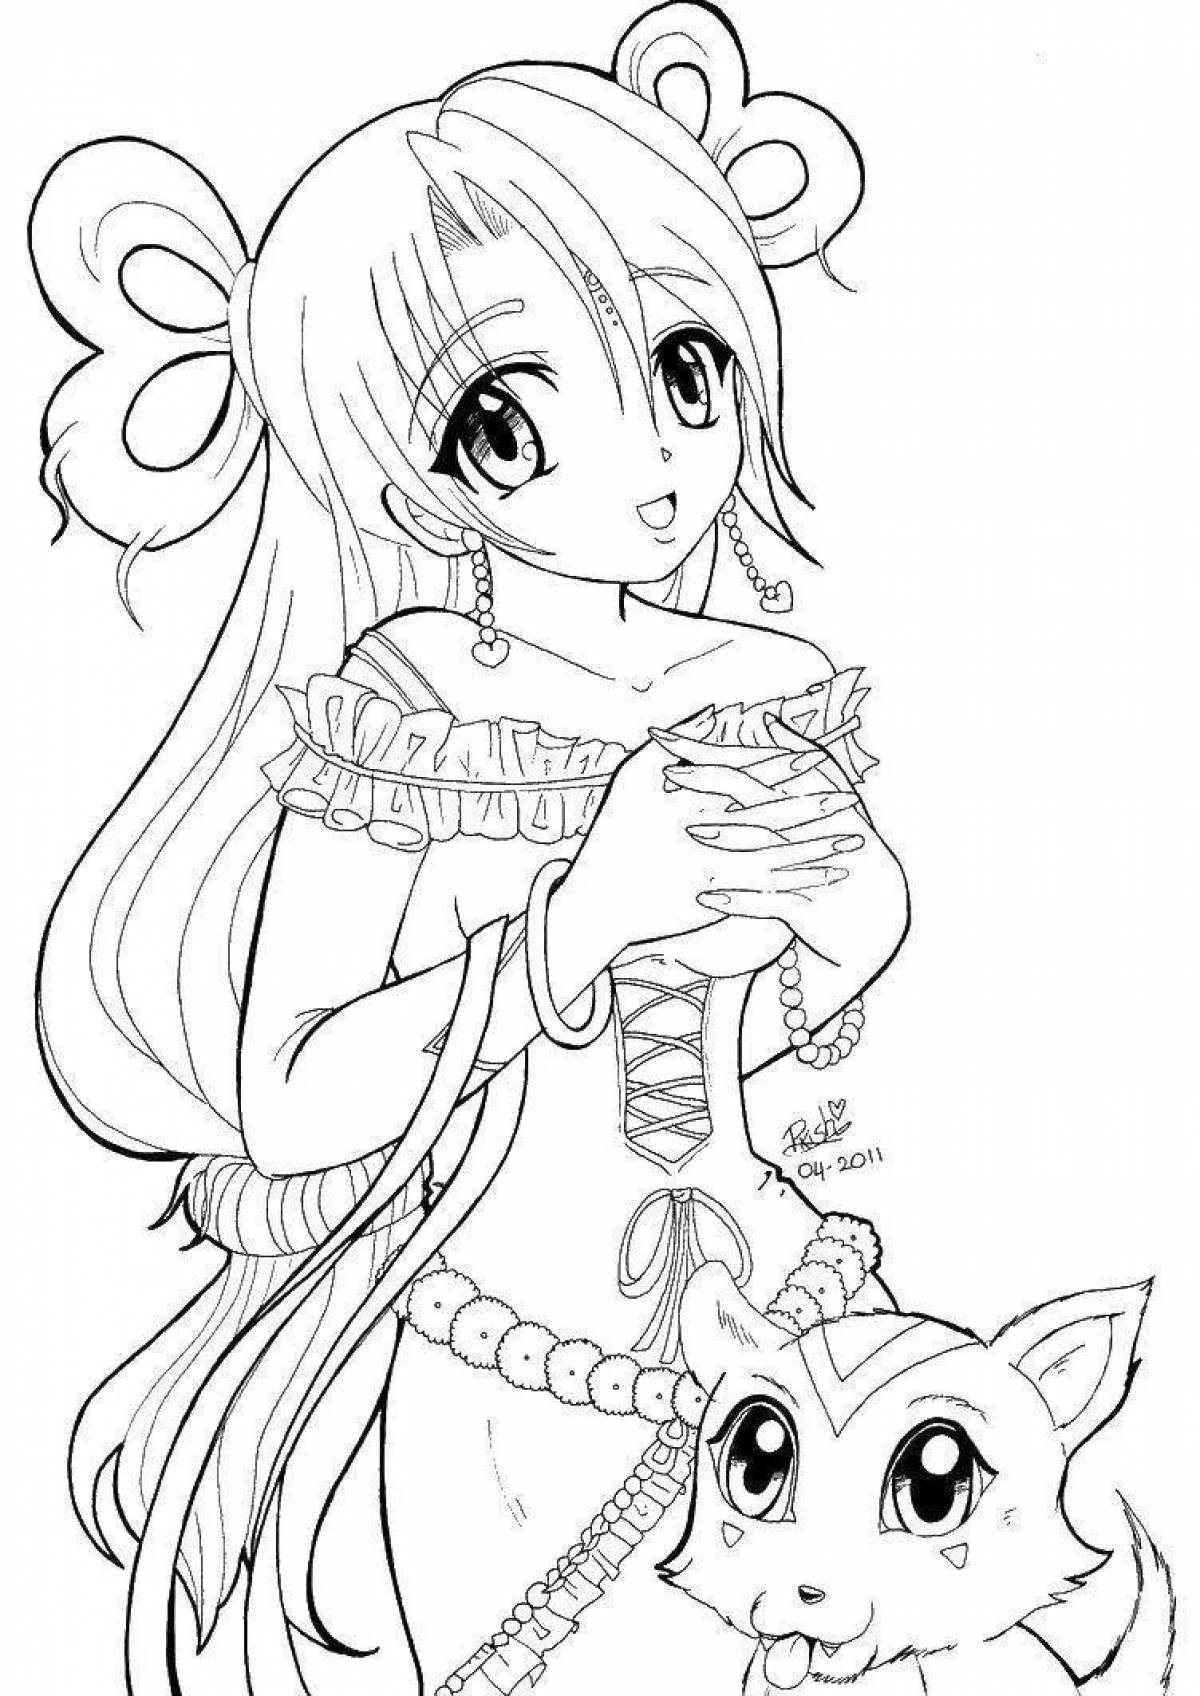 Awesome anime girls coloring pages